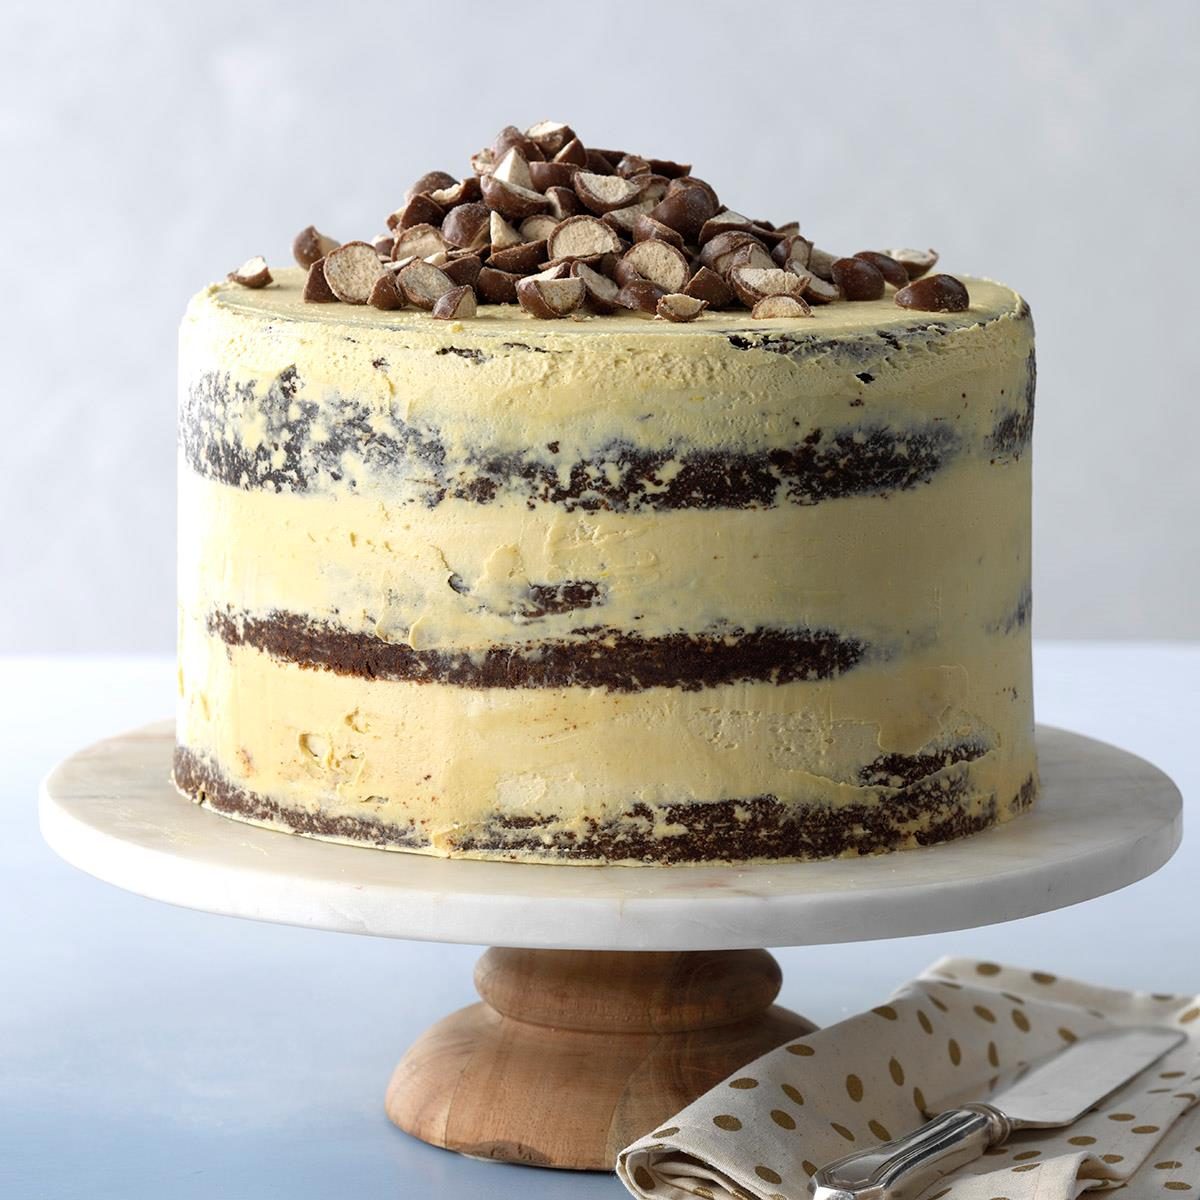 <p>If you want a dessert that will take the cake at a St. Patrick's Day celebration, look no further! The rich chocolate cake is incredibly moist and has a nice malt flavor that's perfectly complemented by the Irish cream frosting. —Jennifer Wayland, Morris Plains, New Jersey</p> <div class="listicle-page__buttons"> <div class="listicle-page__cta-button"><a href='https://www.tasteofhome.com/recipes/malted-chocolate-stout-layer-cake/'>Go to Recipe</a></div> </div>